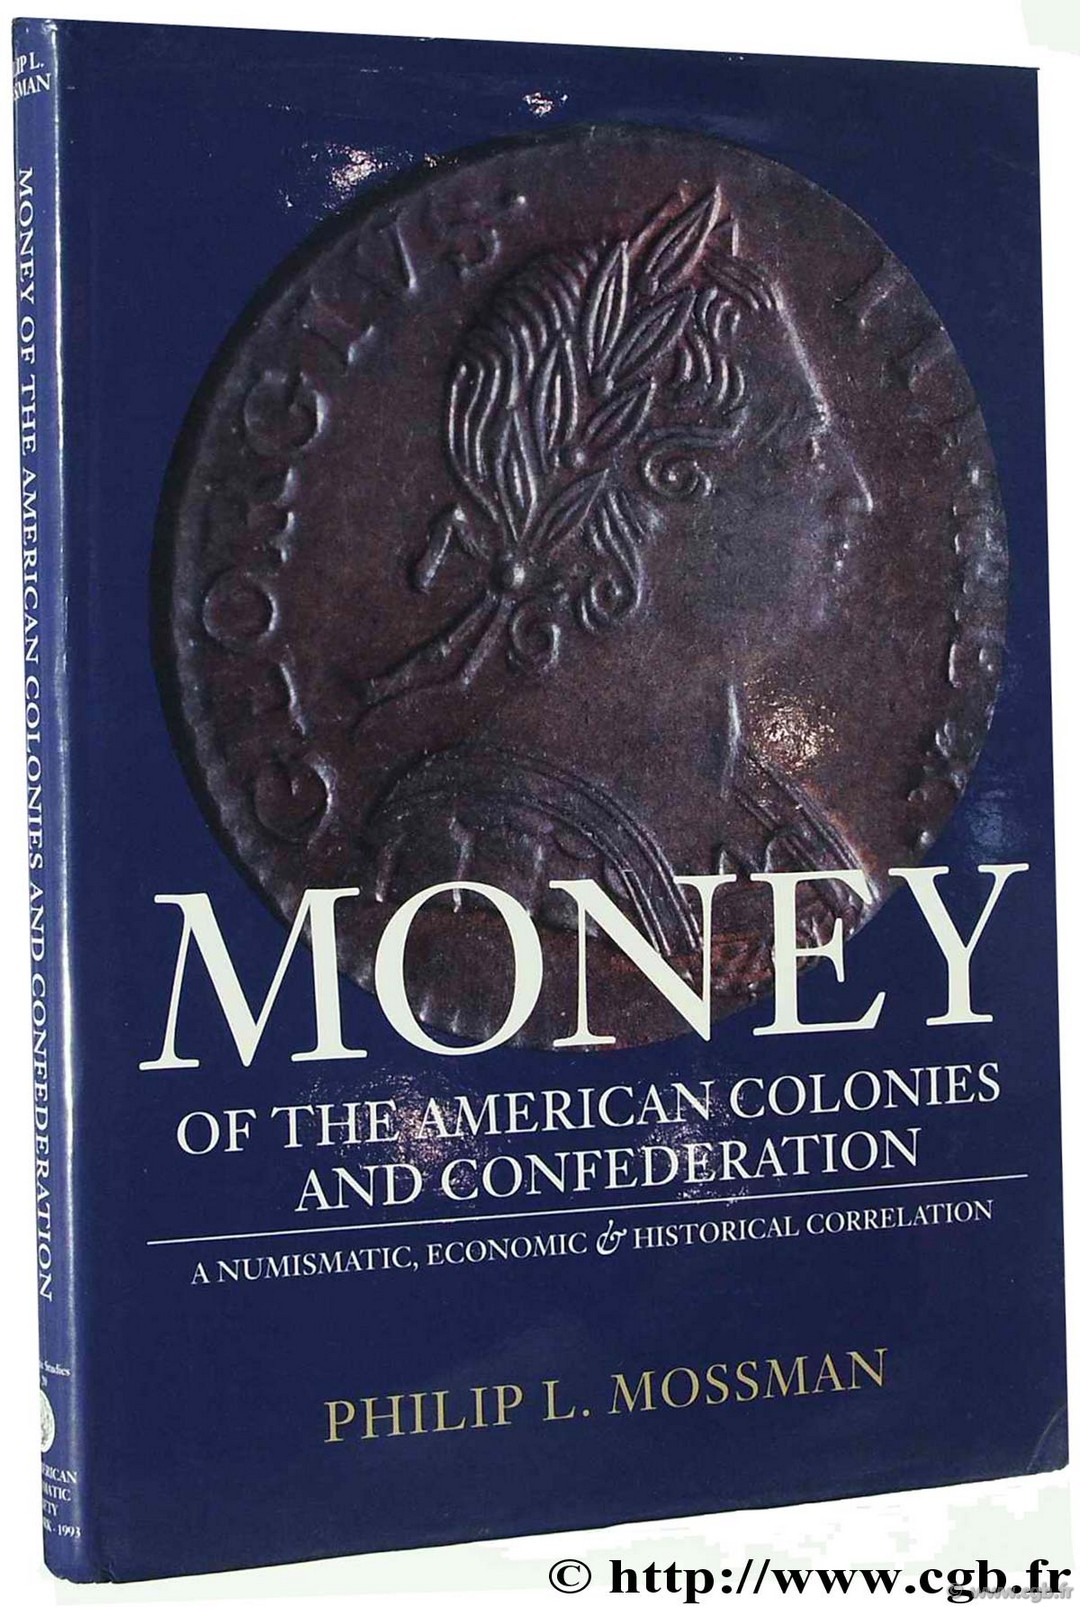 Money of the American Colonies and Confederation. A Numismatic, economic & historical correlation MOSSMAN P.-J.